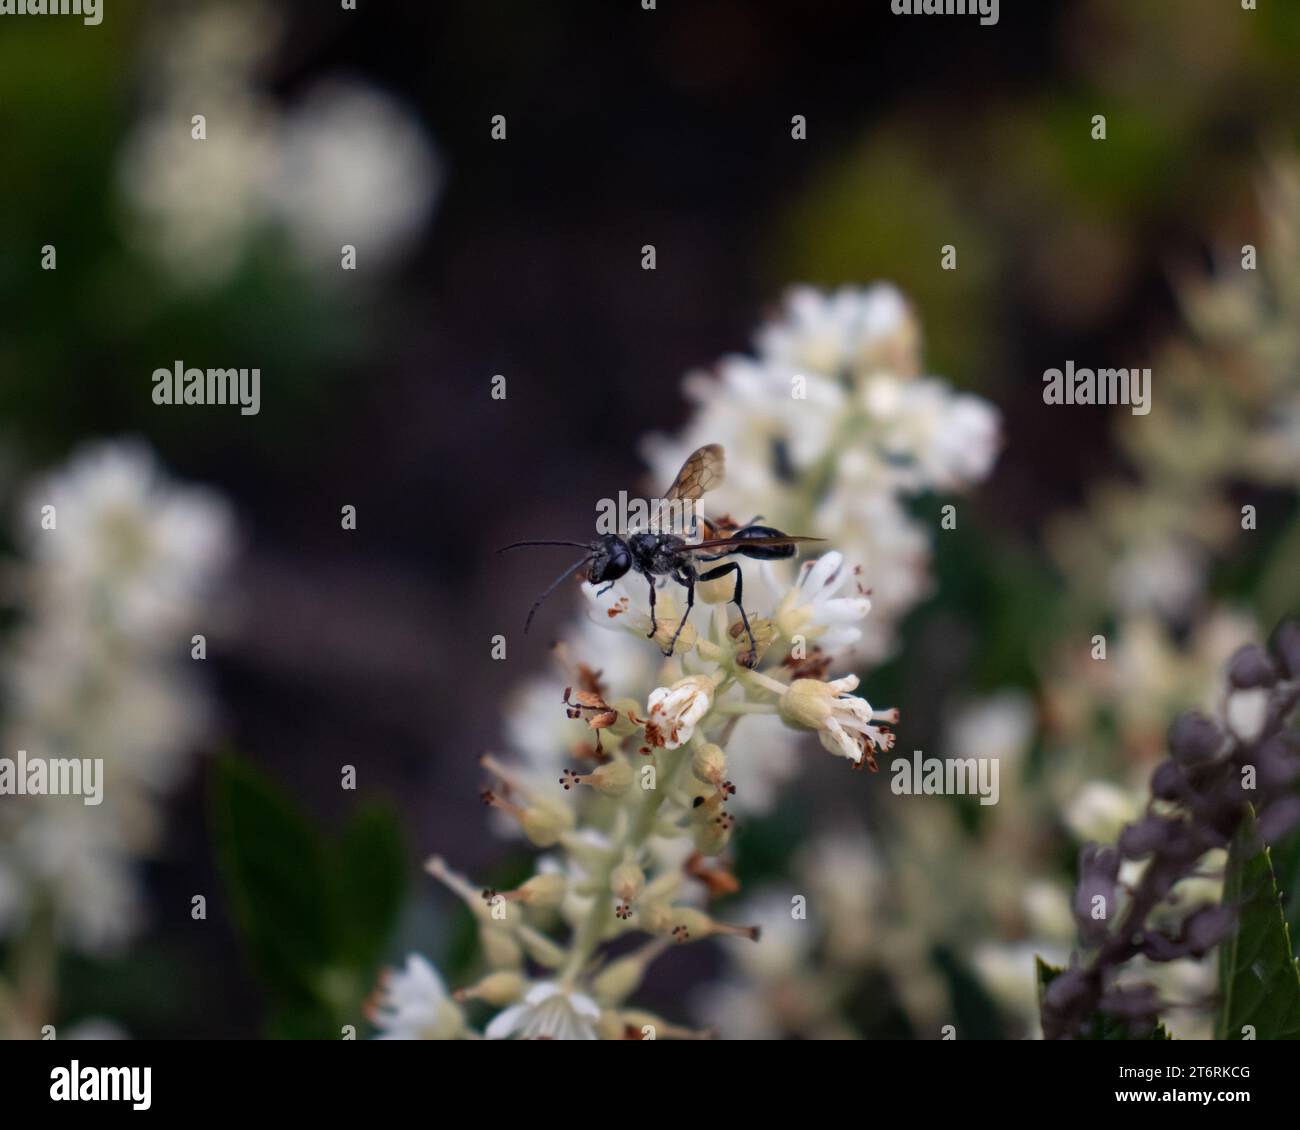 A close up photo of a great black wasp on sweet peppercorn blossoms. Stock Photo